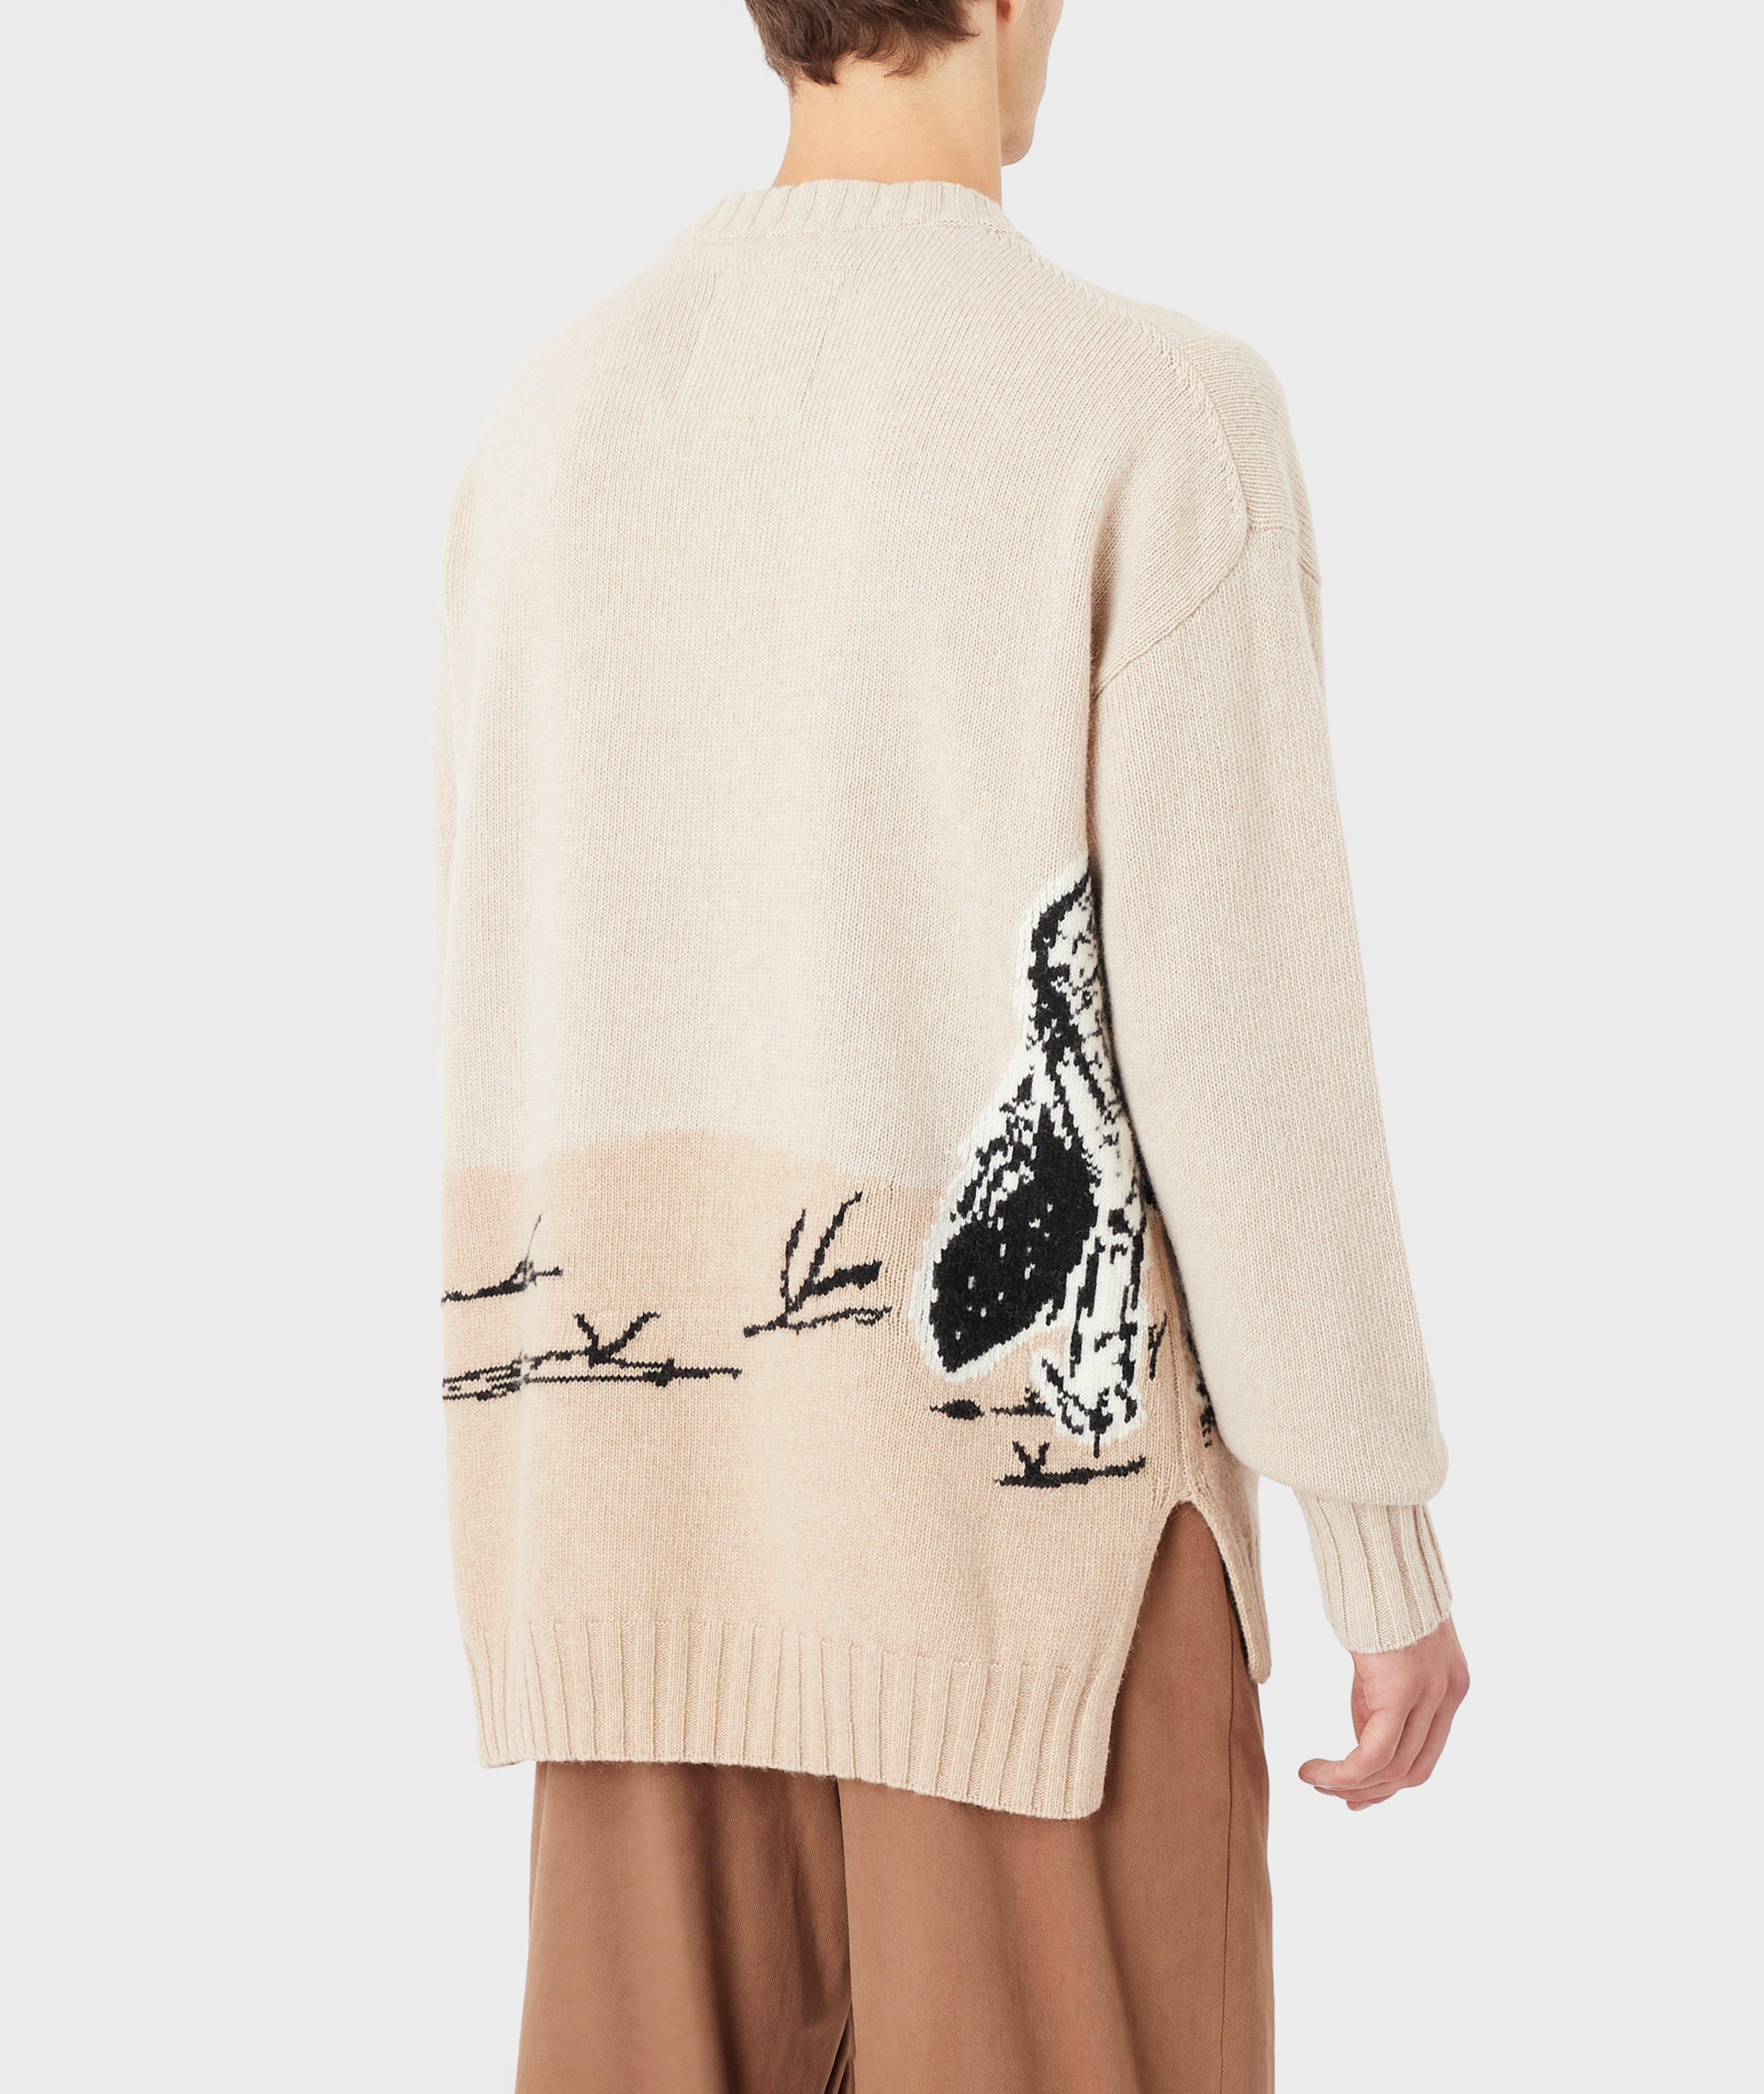 EArctic Sustainable Collection Intarsia Animal Sweater image 2